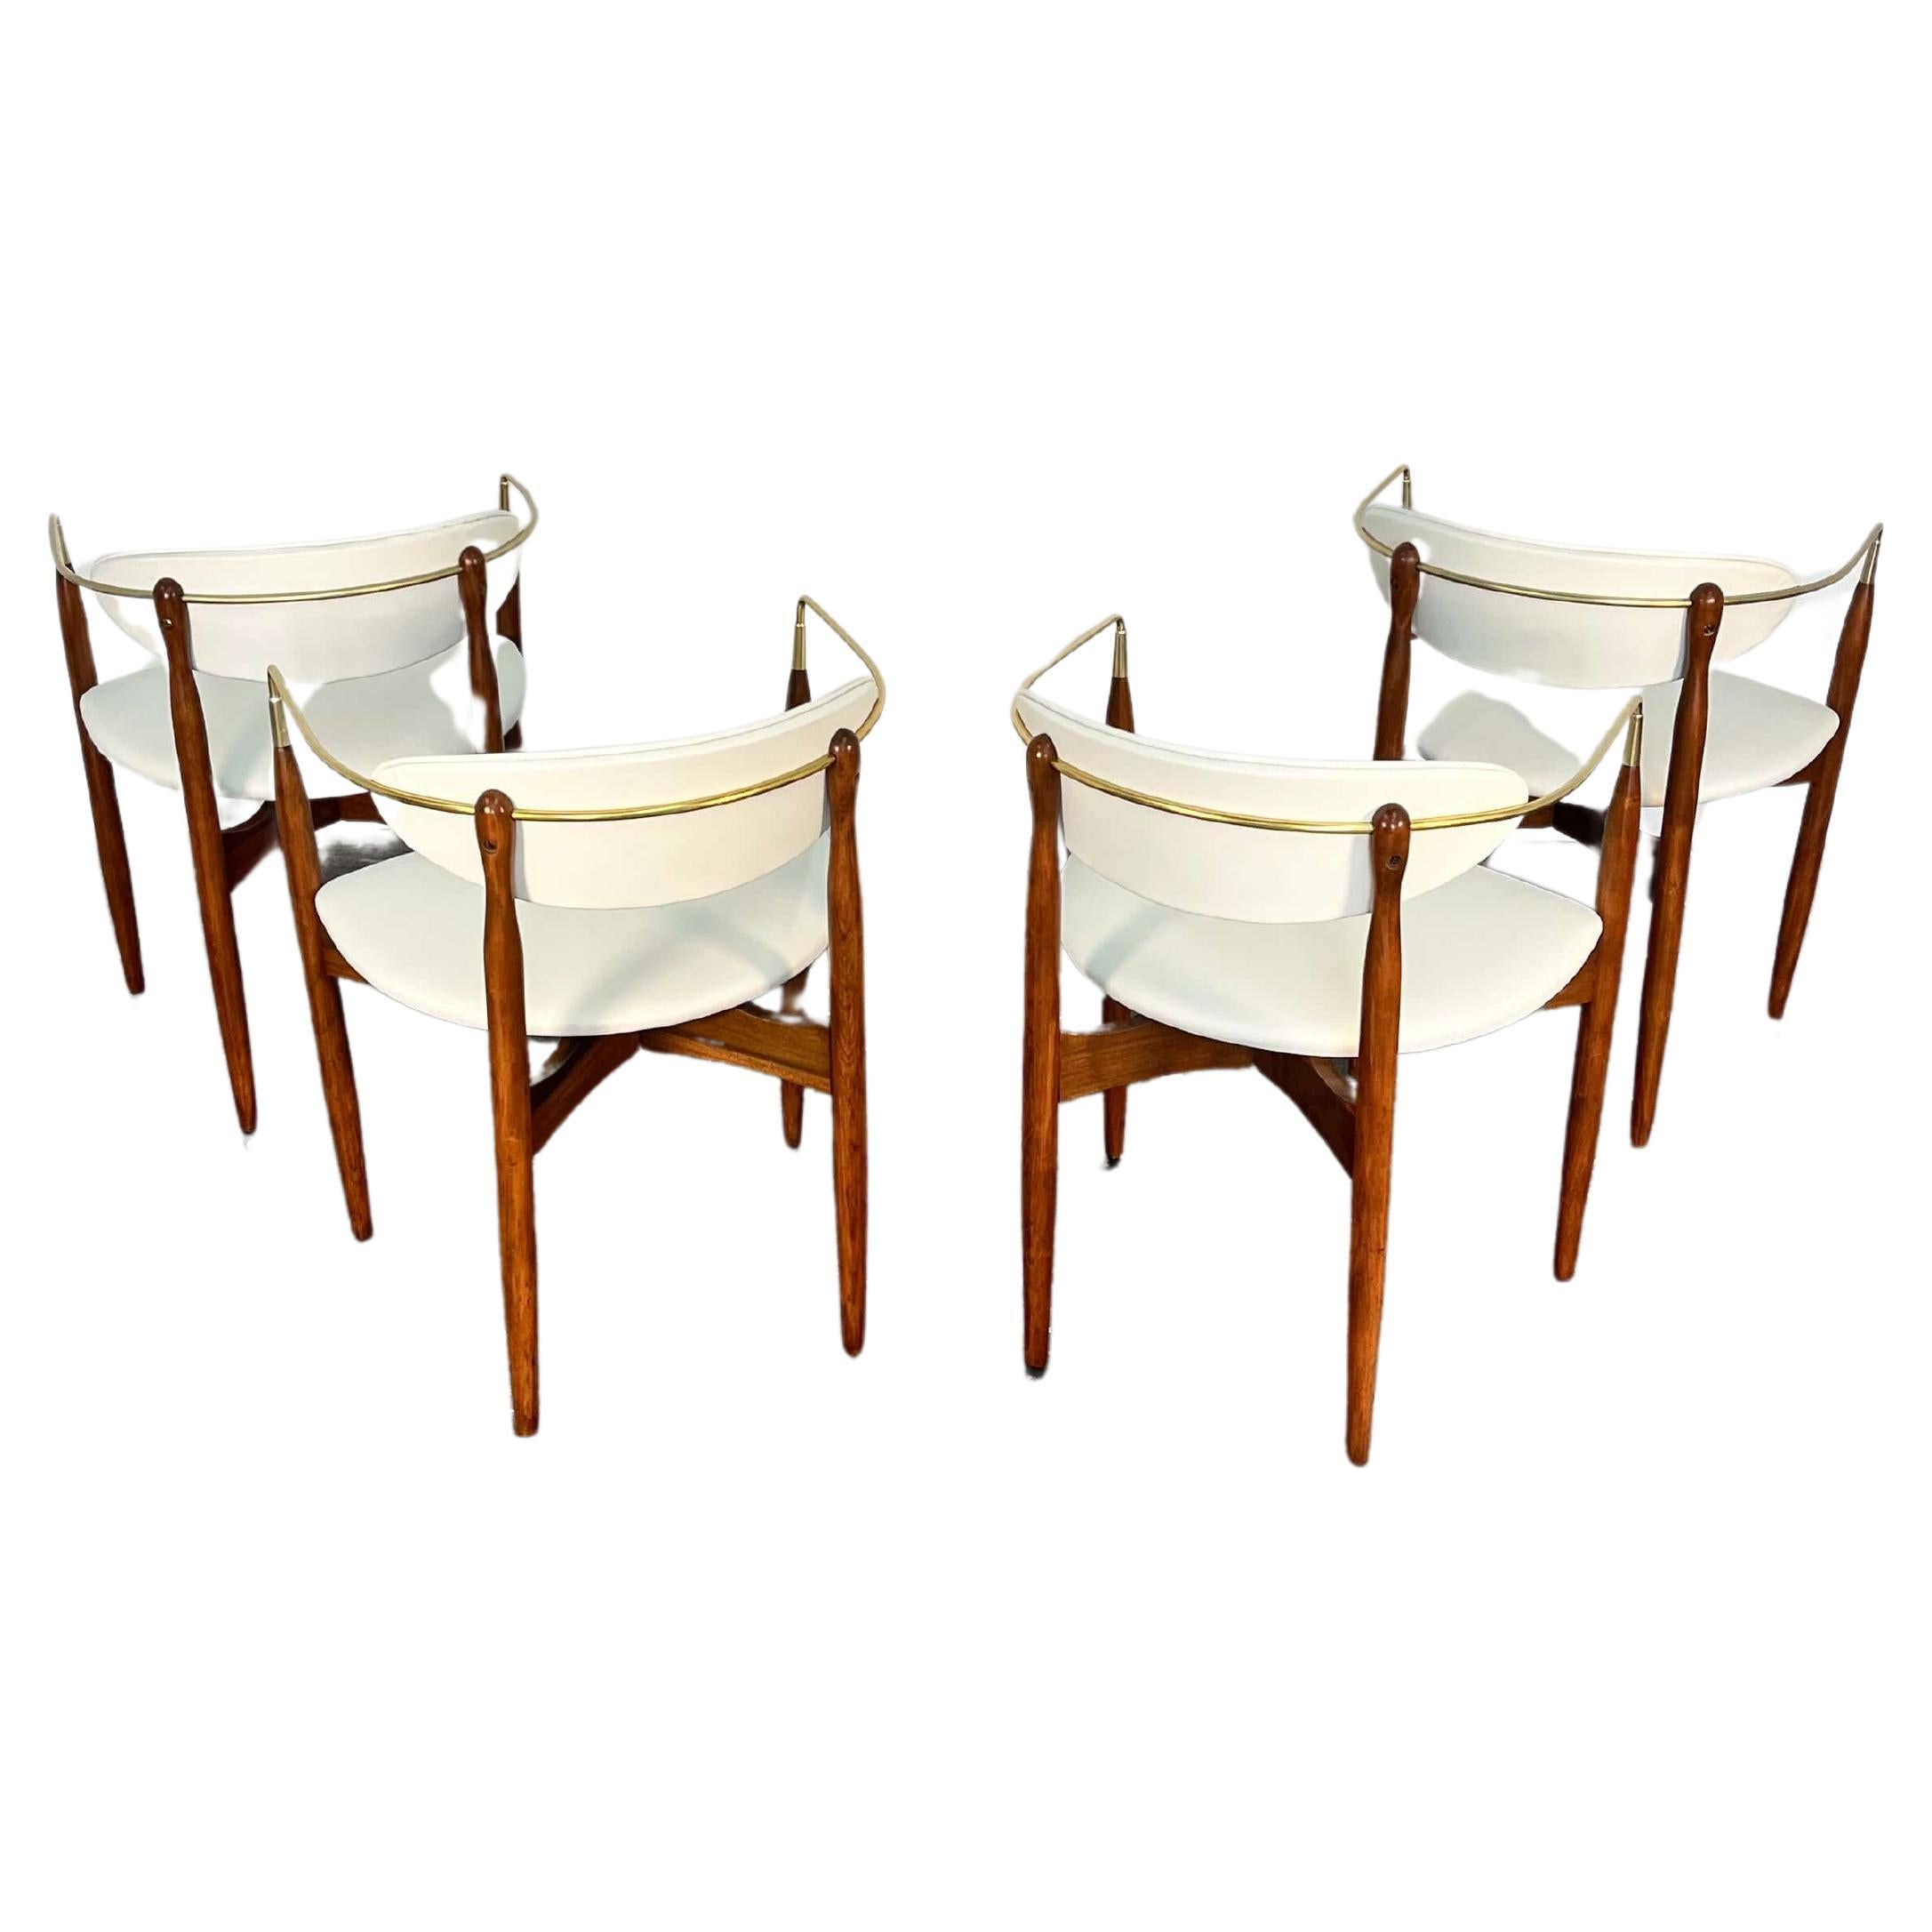 Mid-20th Century Dan Johnson for Selig Viscount Chairs in Leather Set of 4